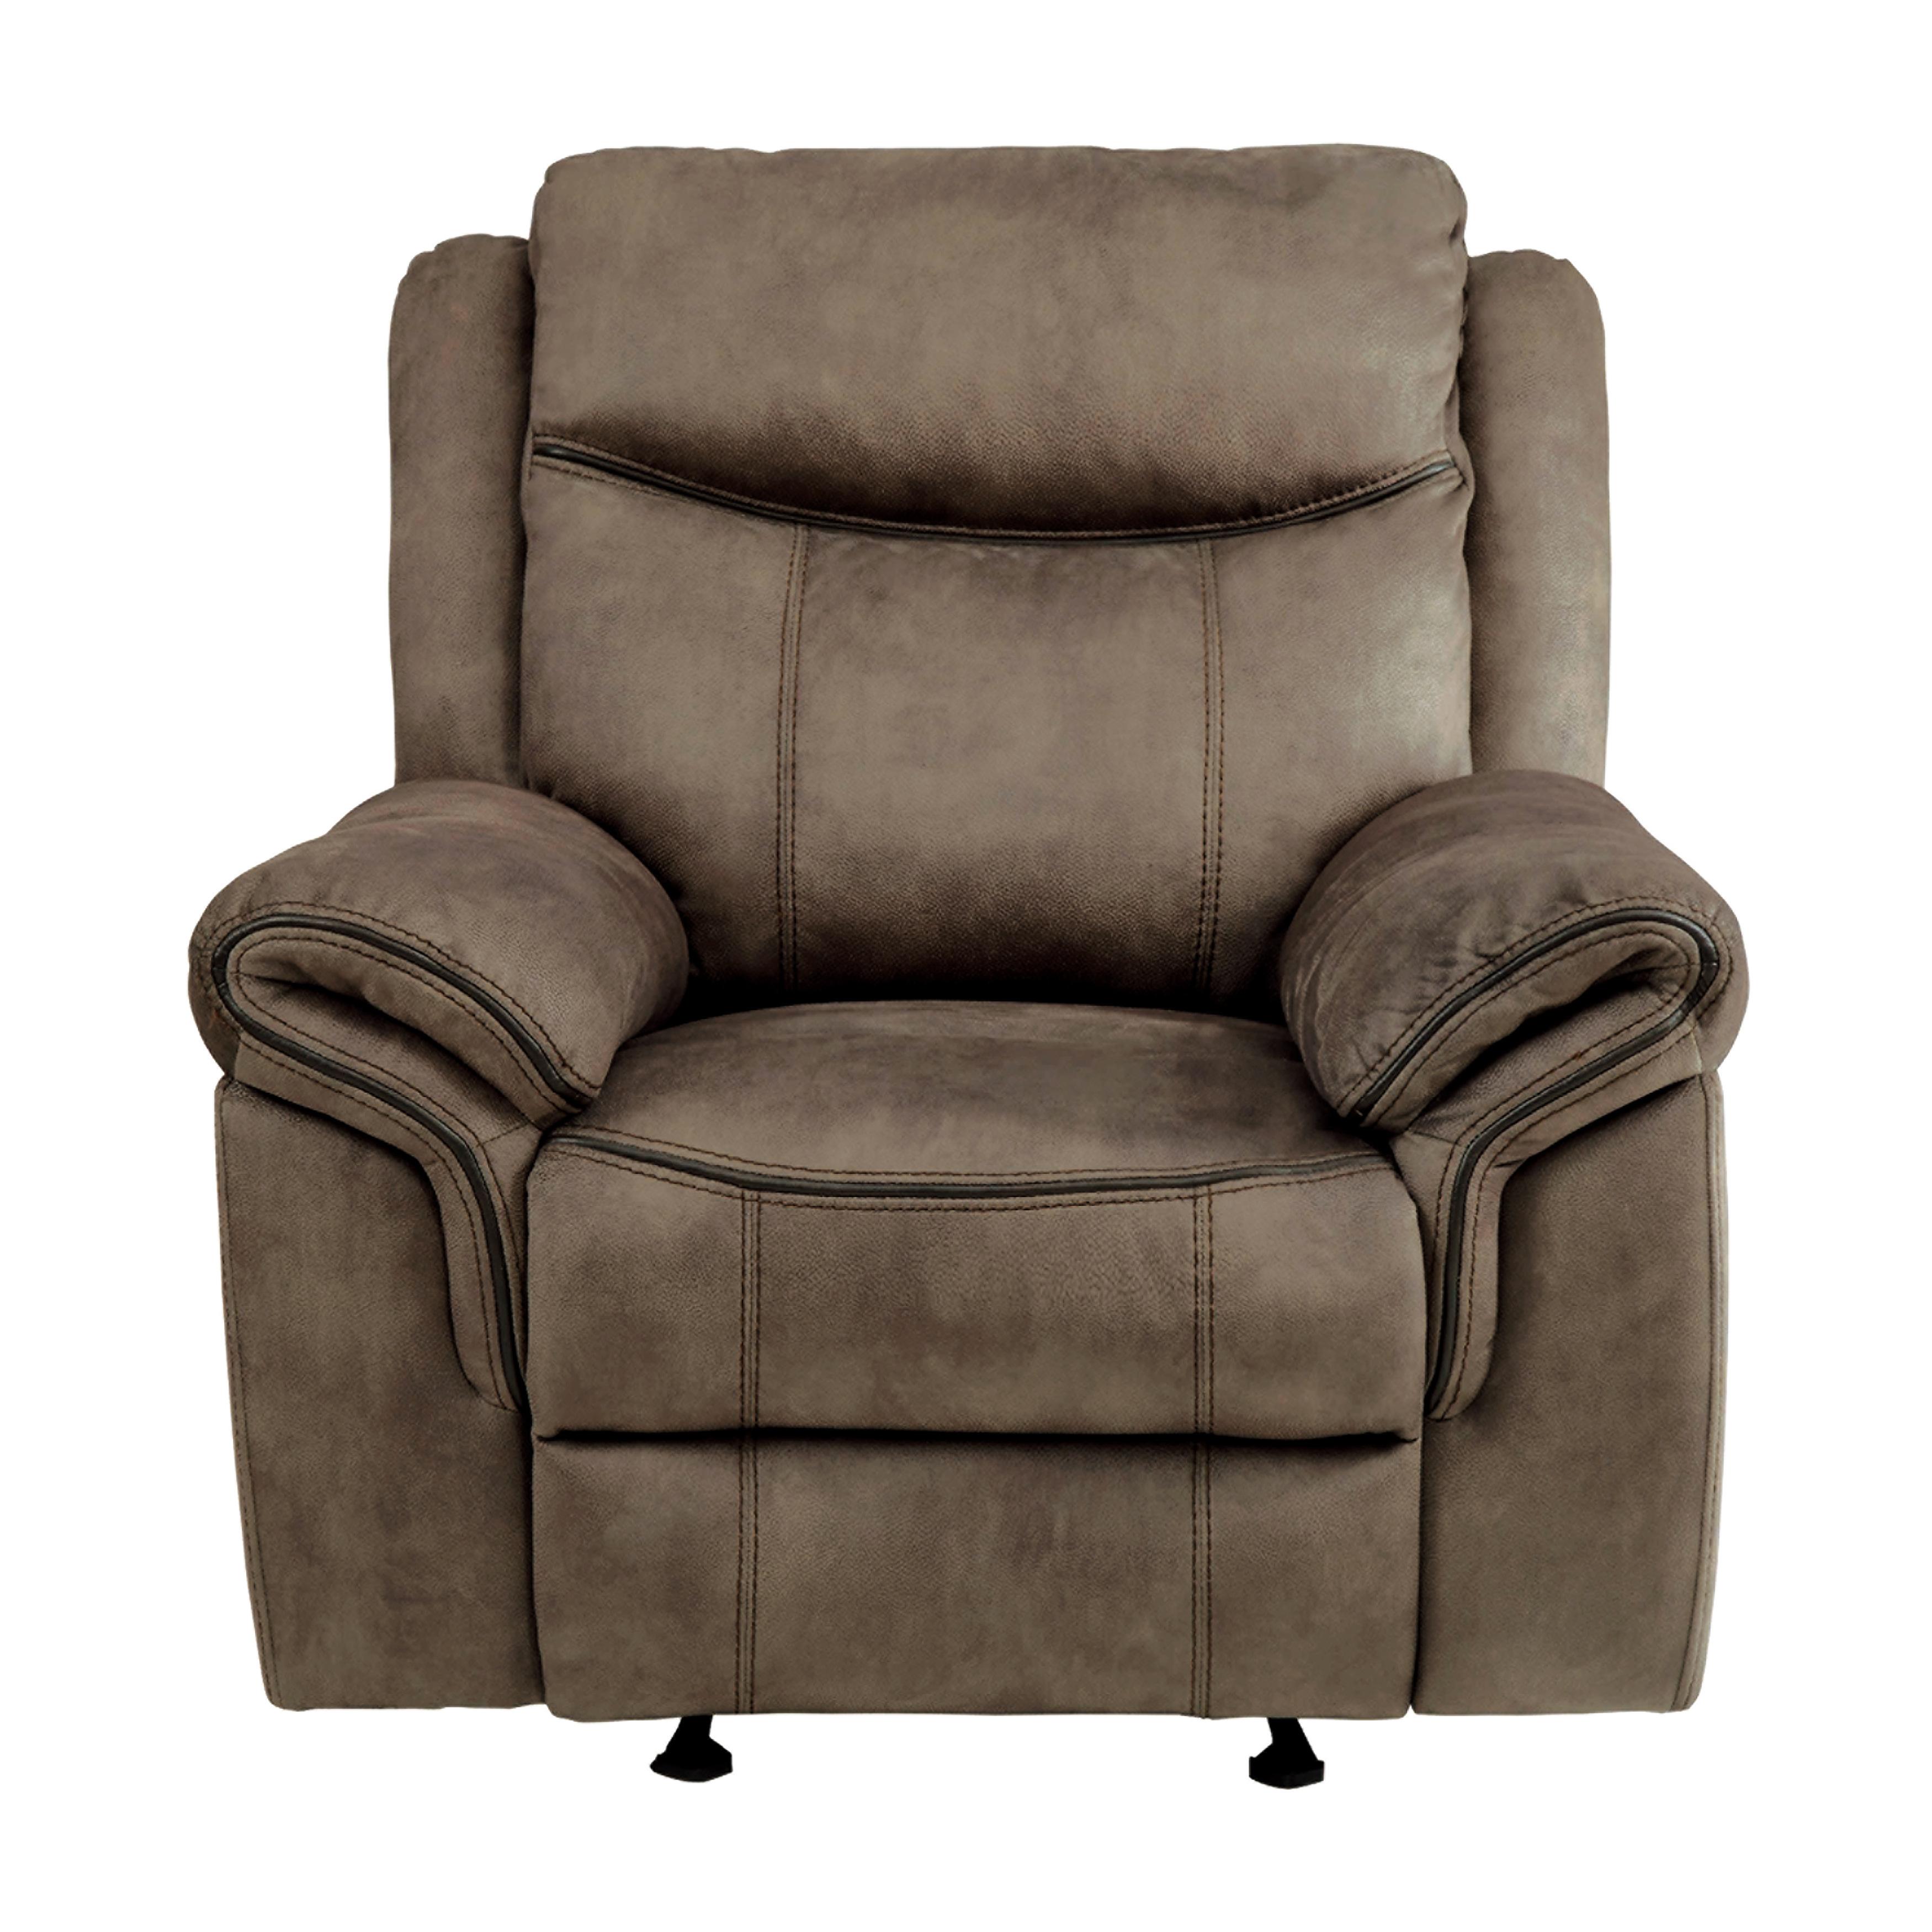 Transitional Reclining Chair 8206NF-1 Aram 8206NF-1 in Brown Faux Leather